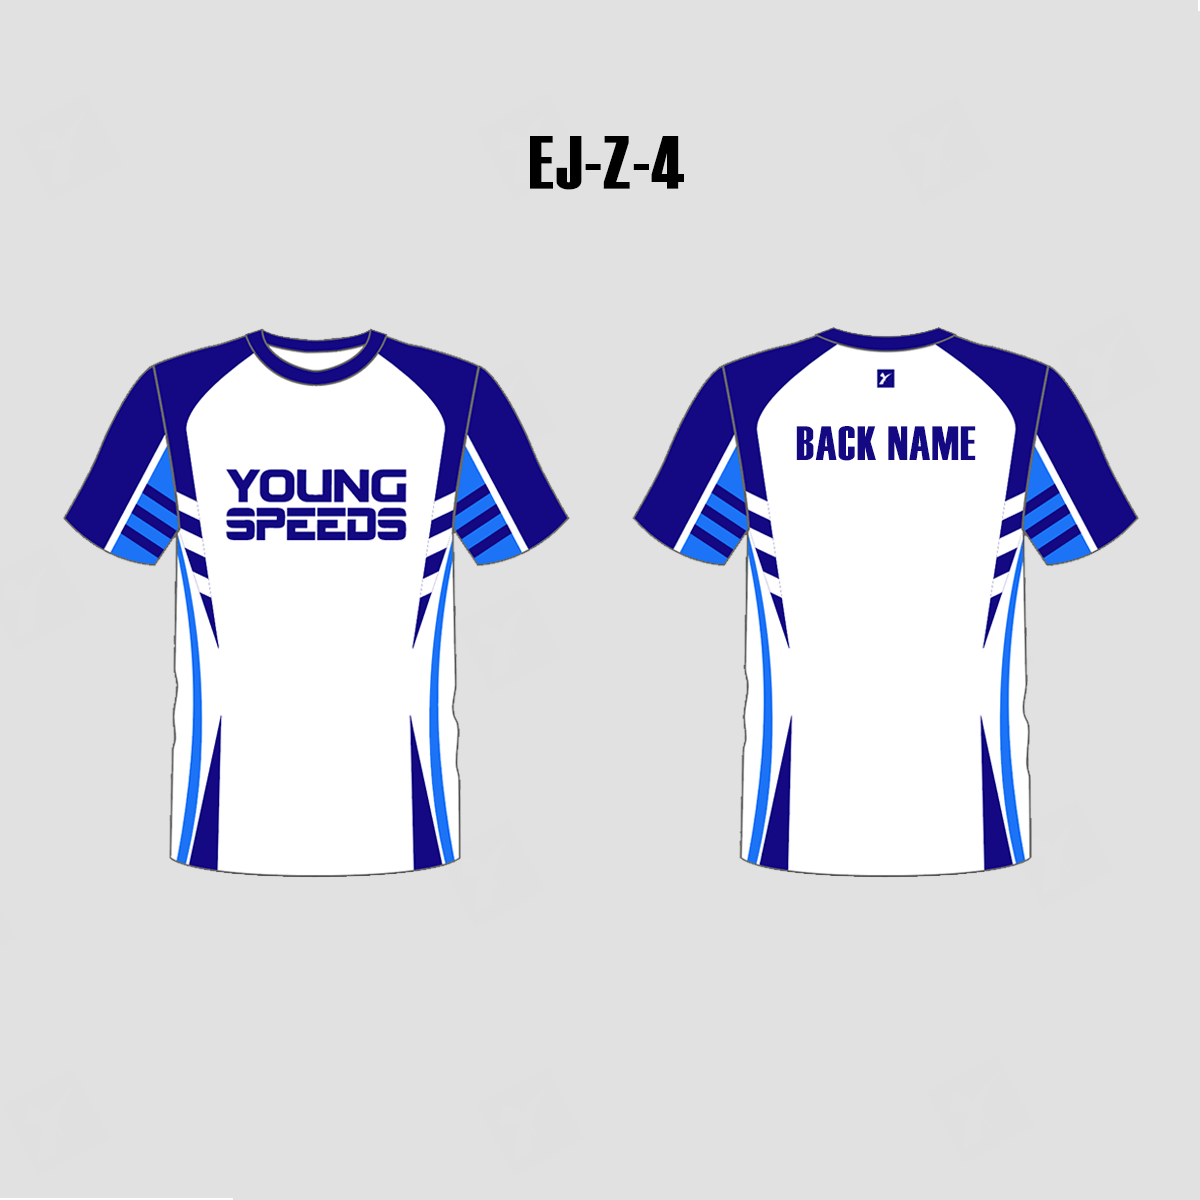 EJZ4 Sublimated Personalized Esports Team Gaming Jerseys - YoungSpeeds